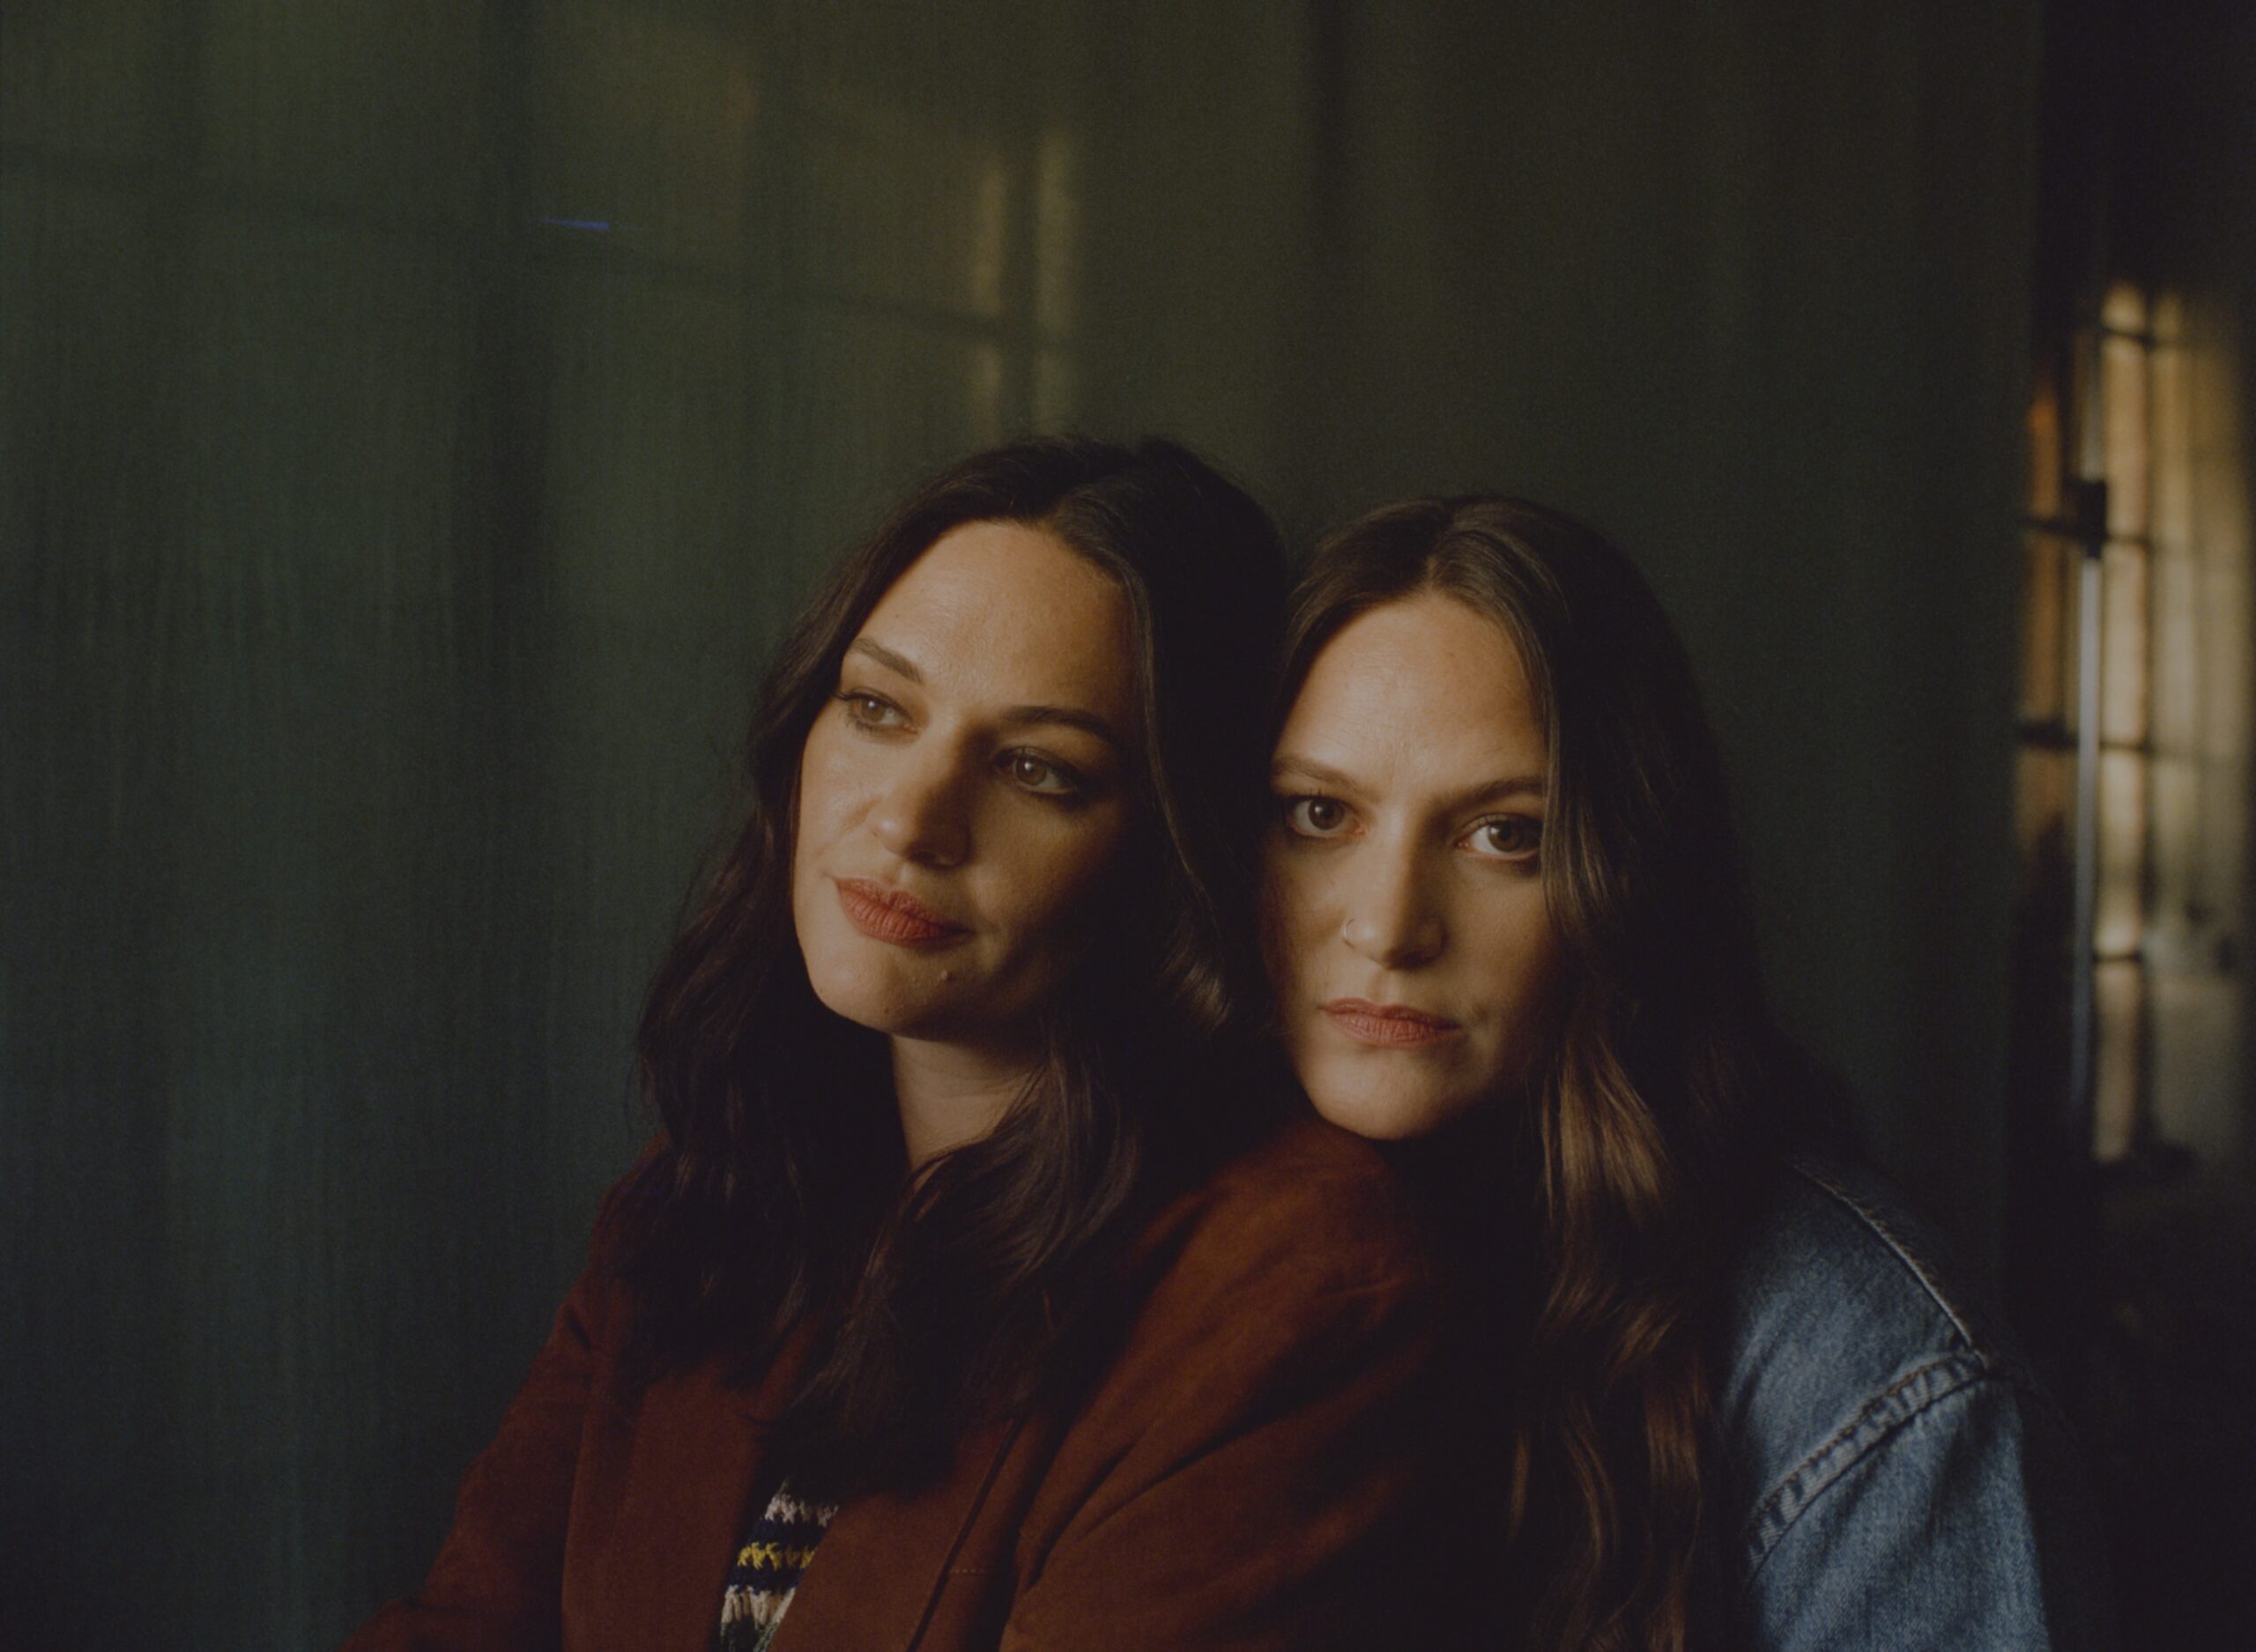 THE STAVES – Selbstfindung